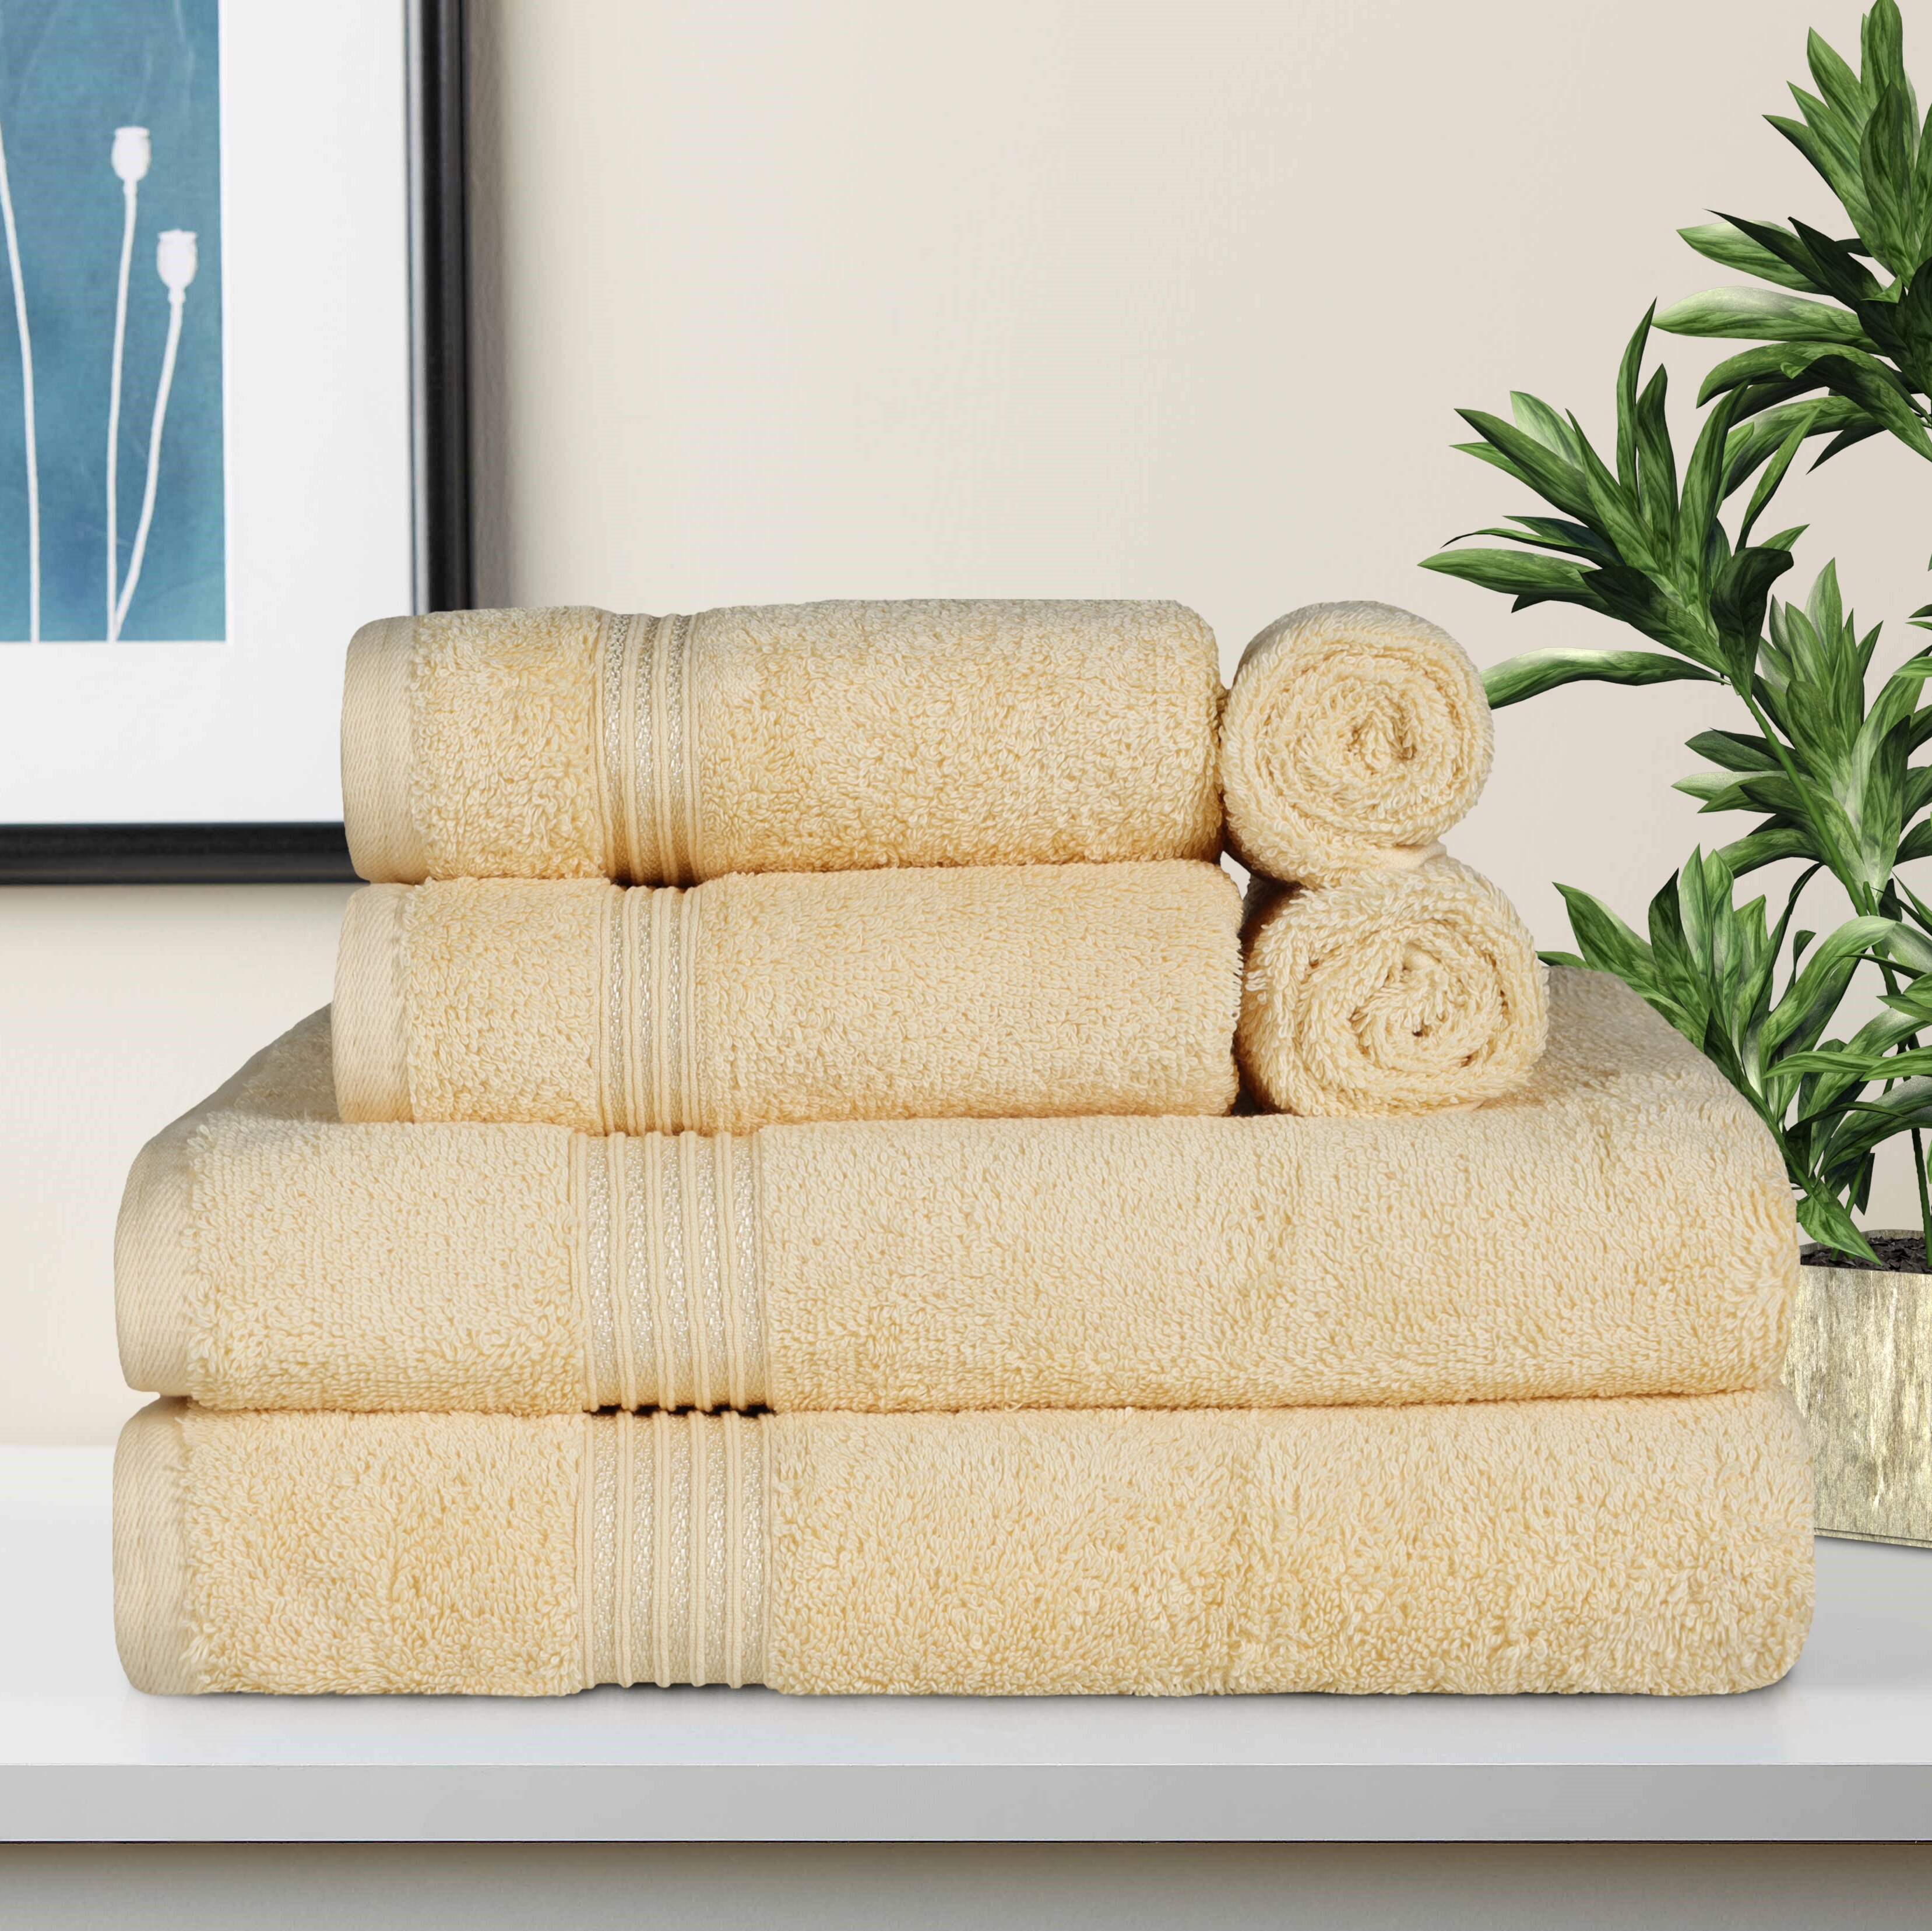 wide smile 2 Piece Bath Towel Set Coffee 1 Bath Towels and 1 Hand Towels Cotton Hotel Quality Super Soft and Highly Absorbent